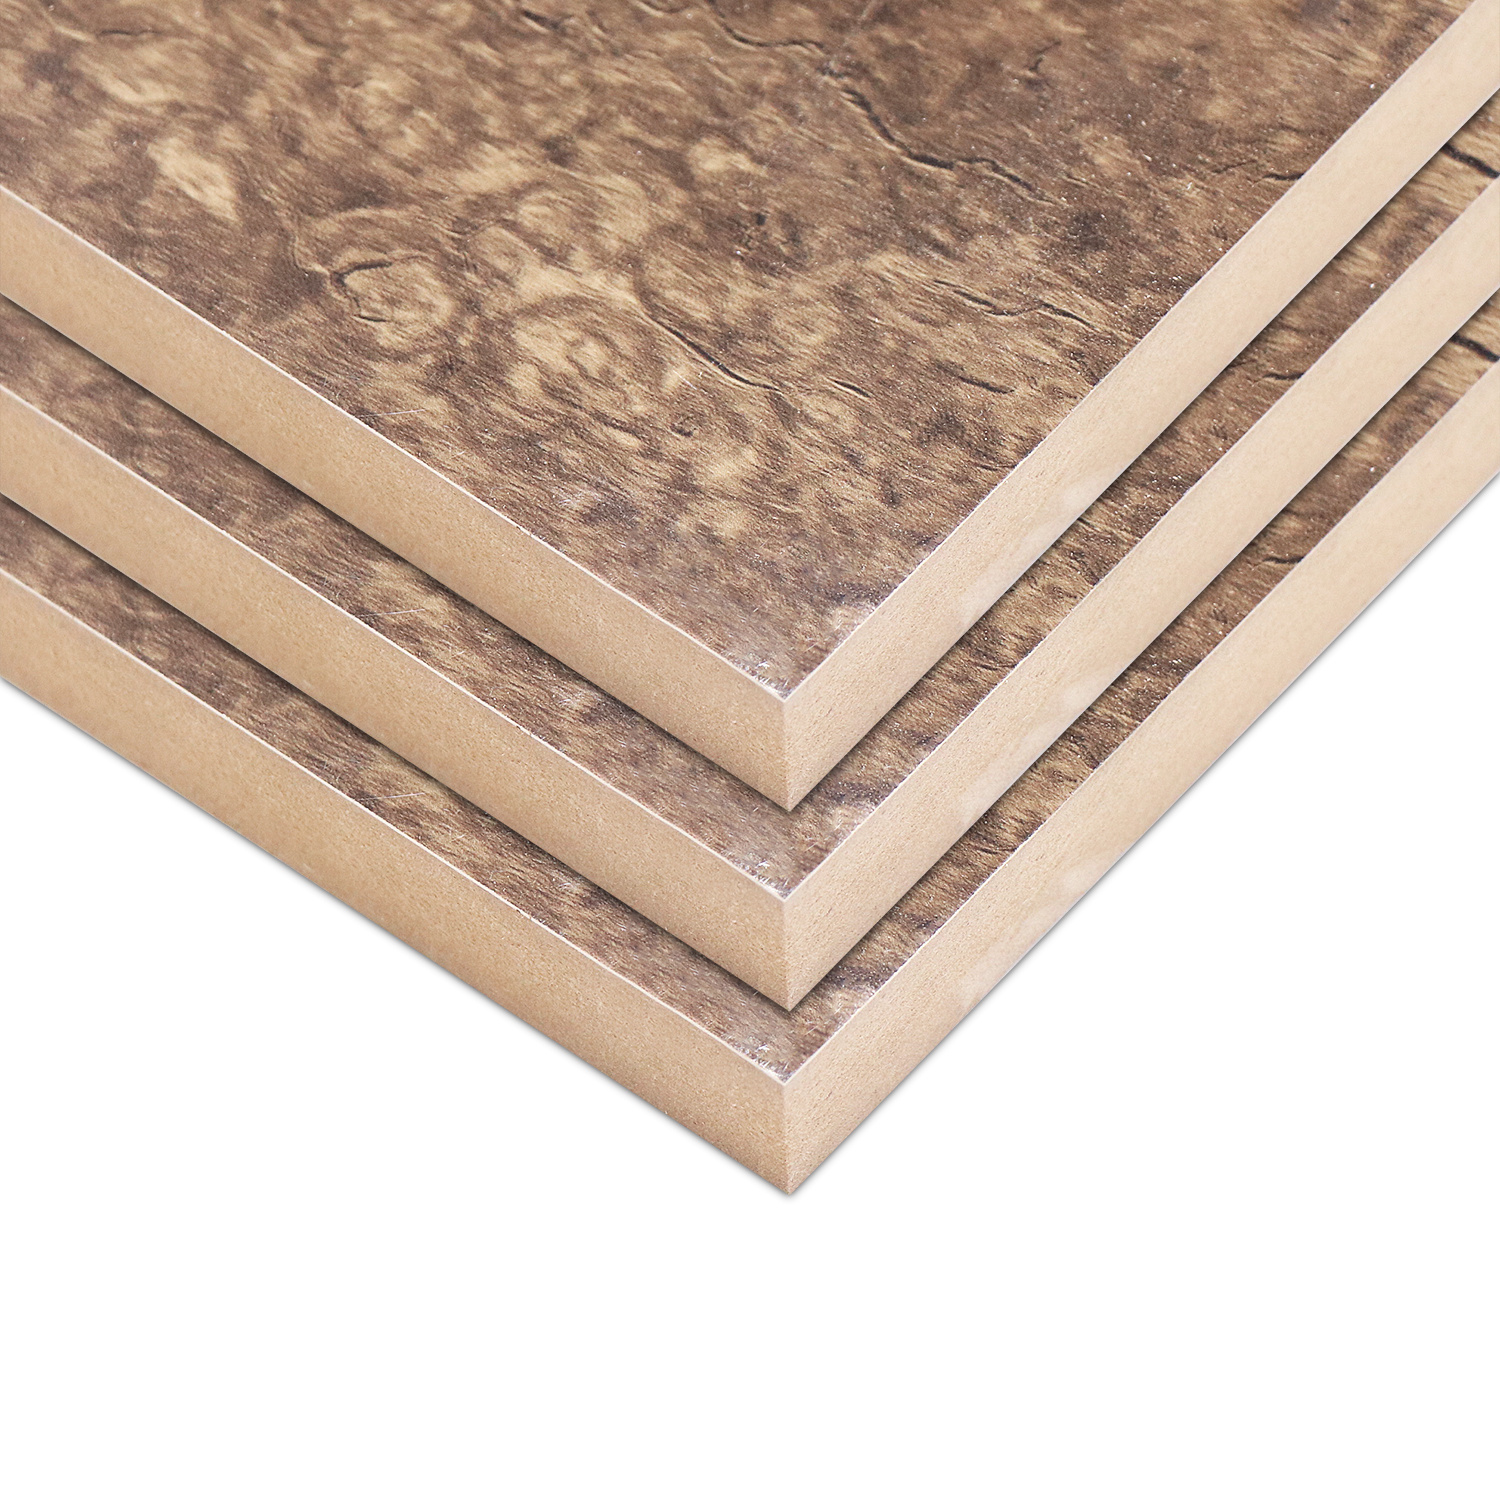 Melamine Stone-Grain Faced MDF Board Brown Faced Smooth MDF Board for Wall Panel